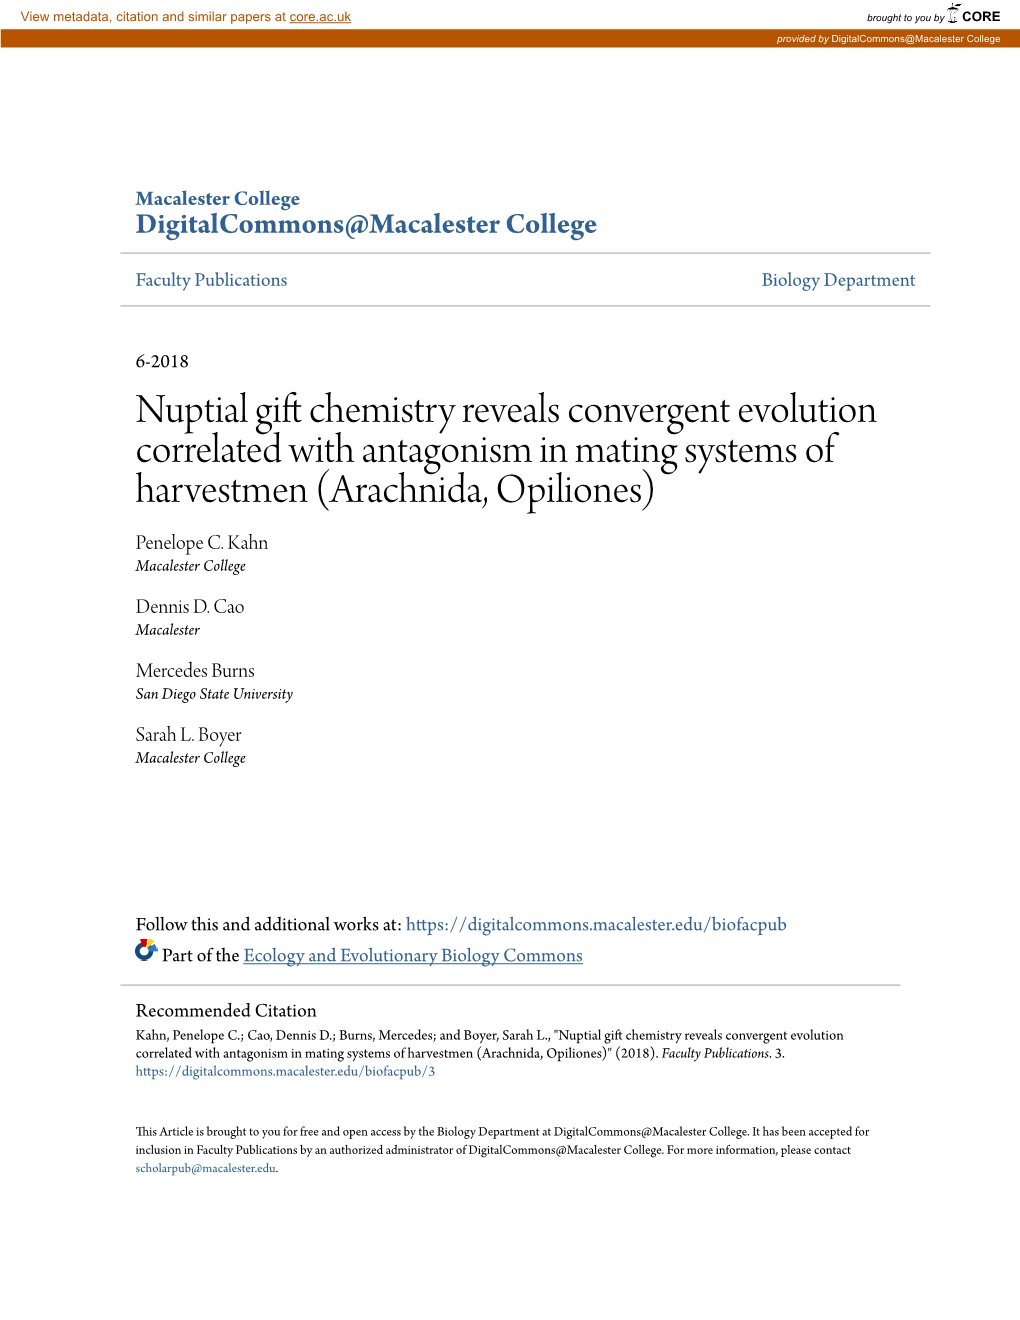 Nuptial Gift Chemistry Reveals Convergent Evolution Correlated with Antagonism in Mating Systems of Harvestmen (Arachnida, Opiliones) Penelope C